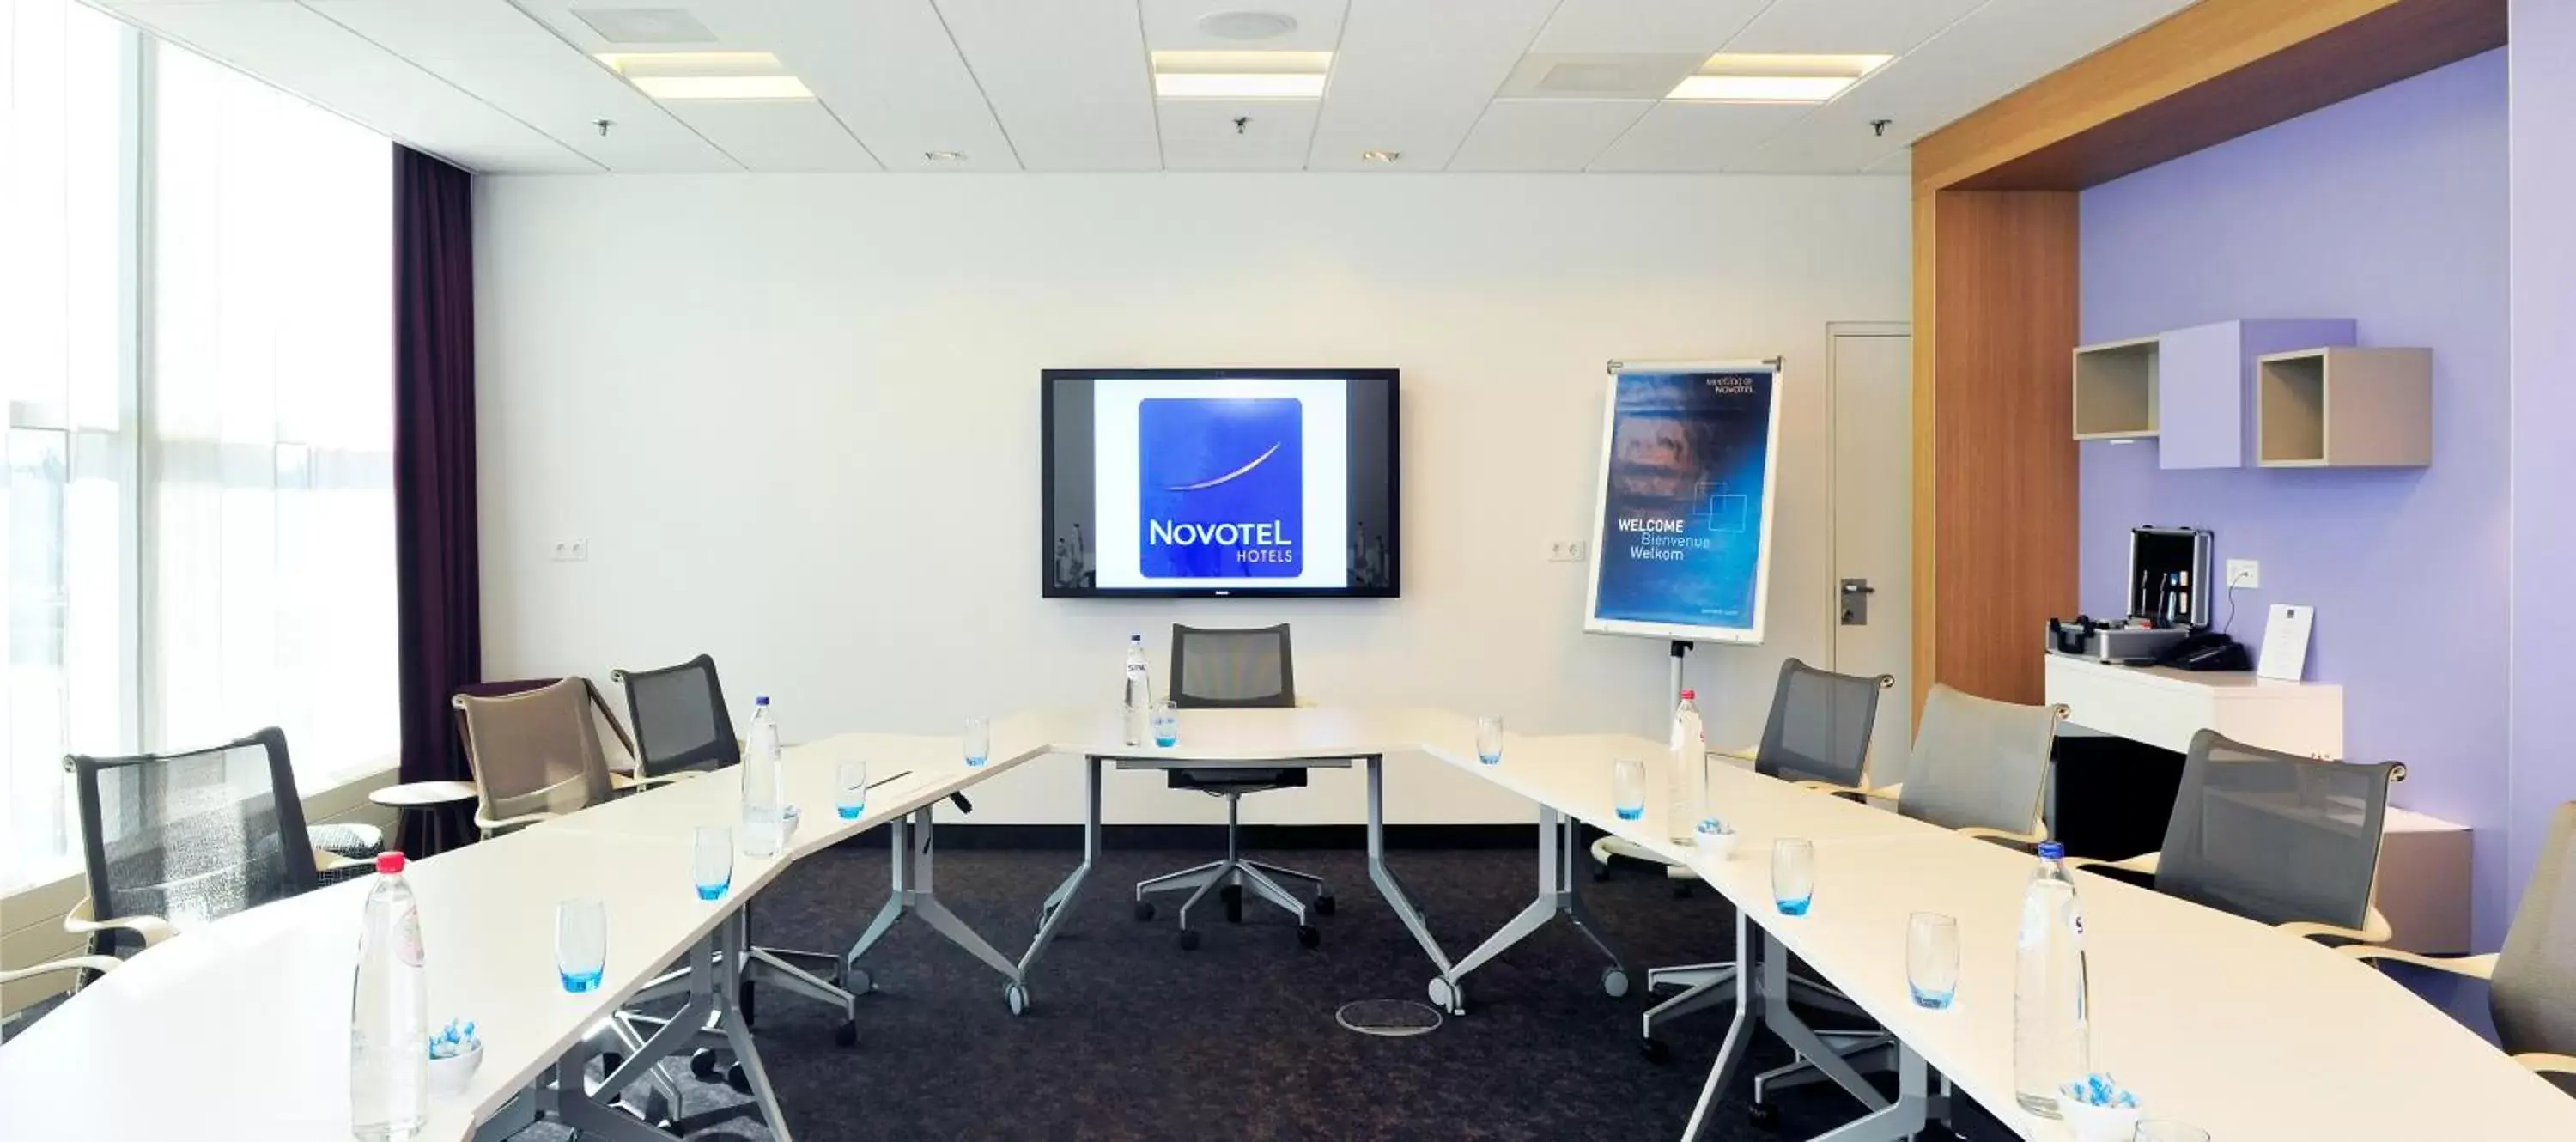 Meeting/conference room in Novotel Rotterdam Brainpark